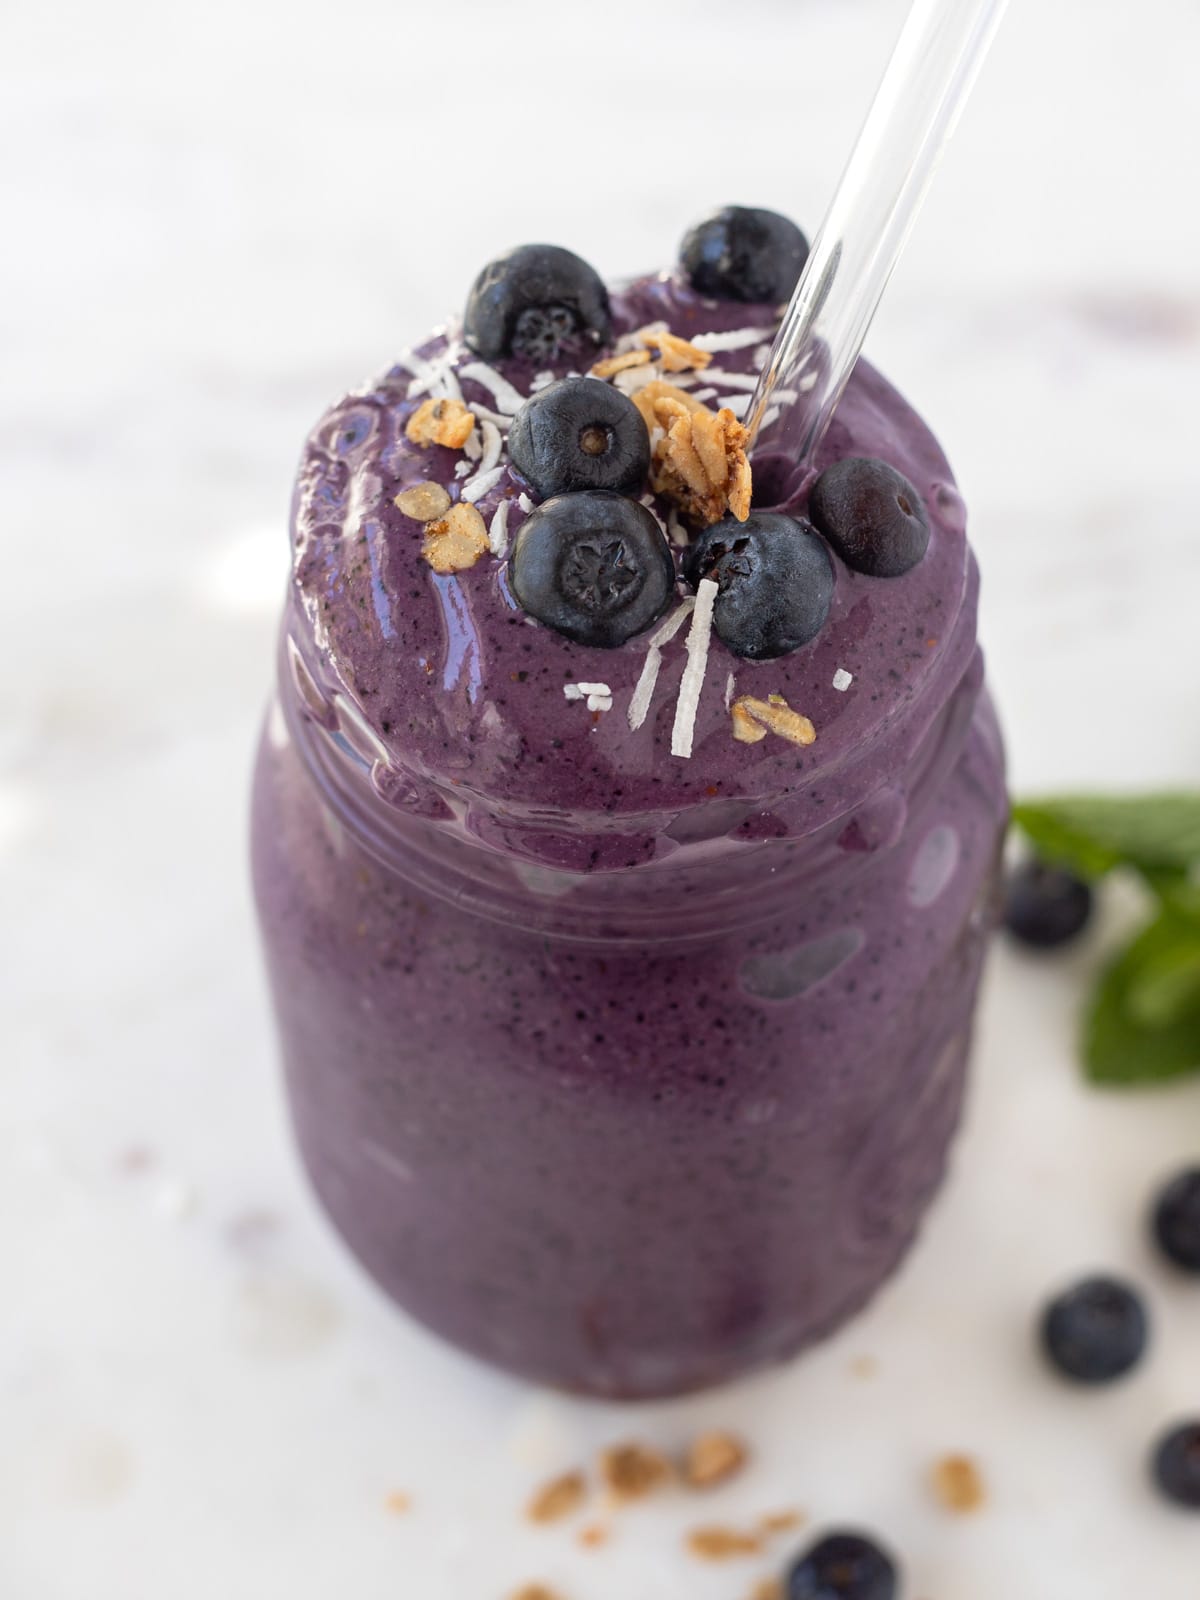 Blueberry banana smoothie in a jar topped with fresh blueberries, granola and shredded coconut.